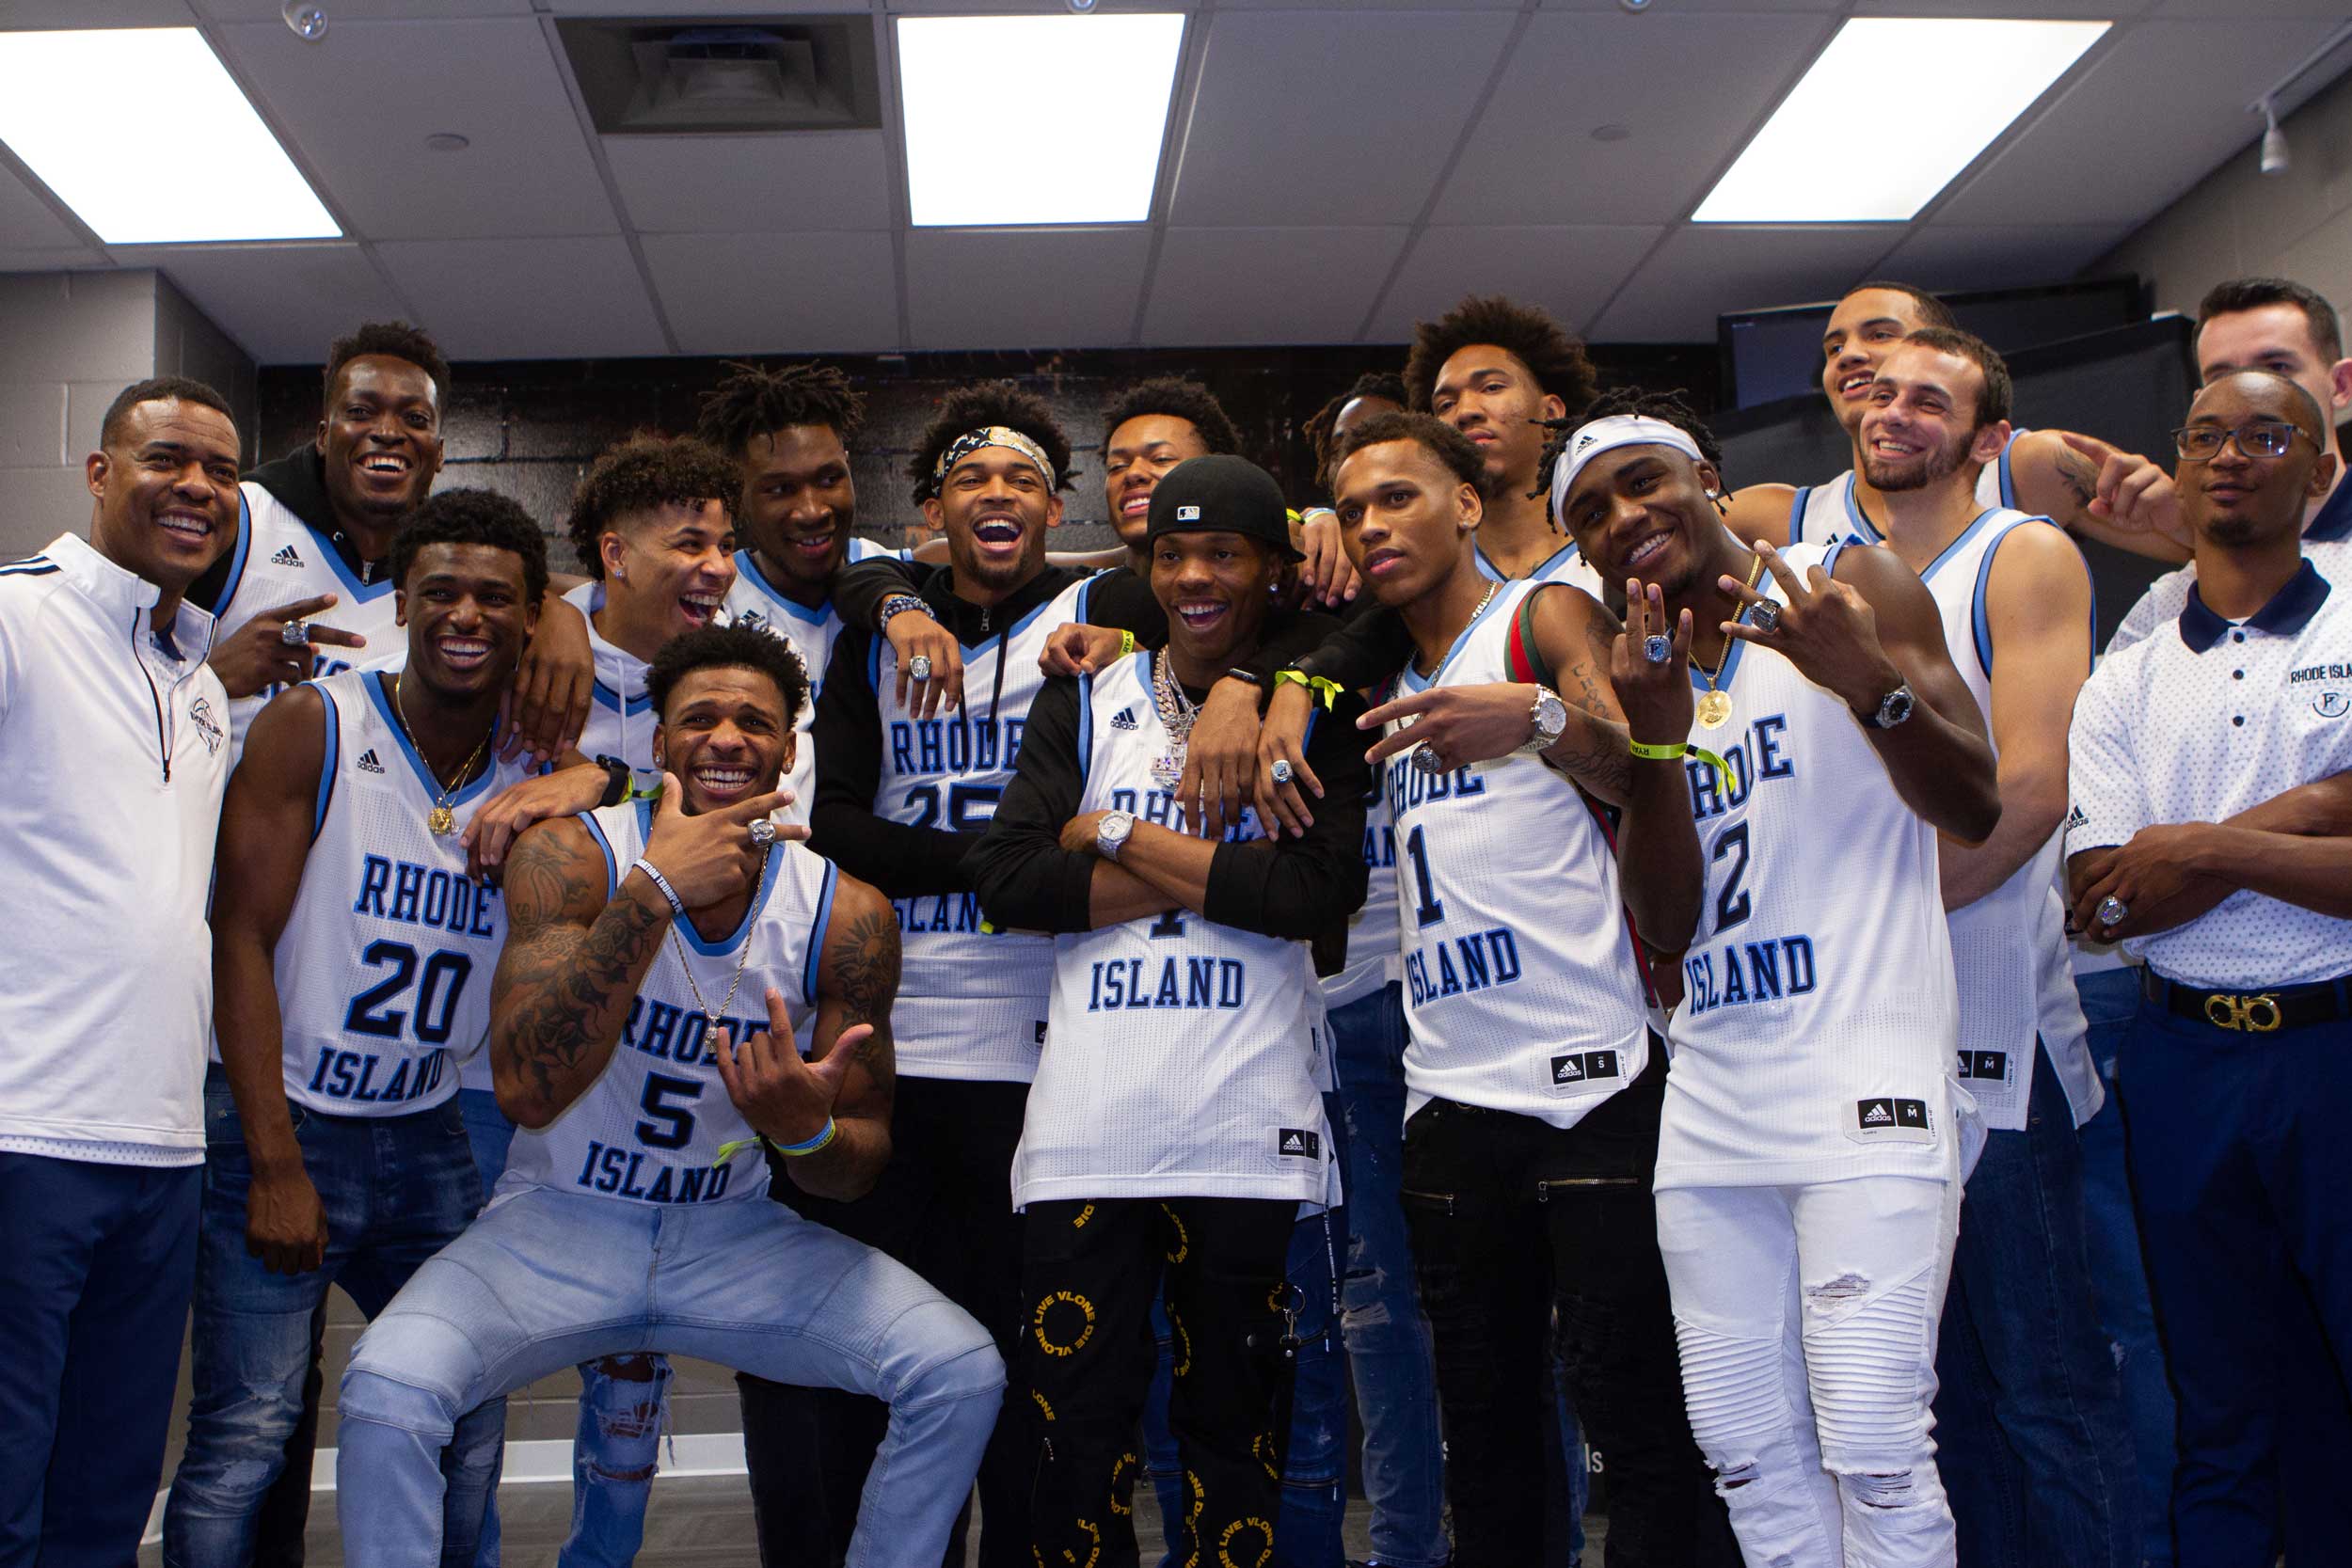 URI men's basketball team and Coach Thompson with Lil Baby